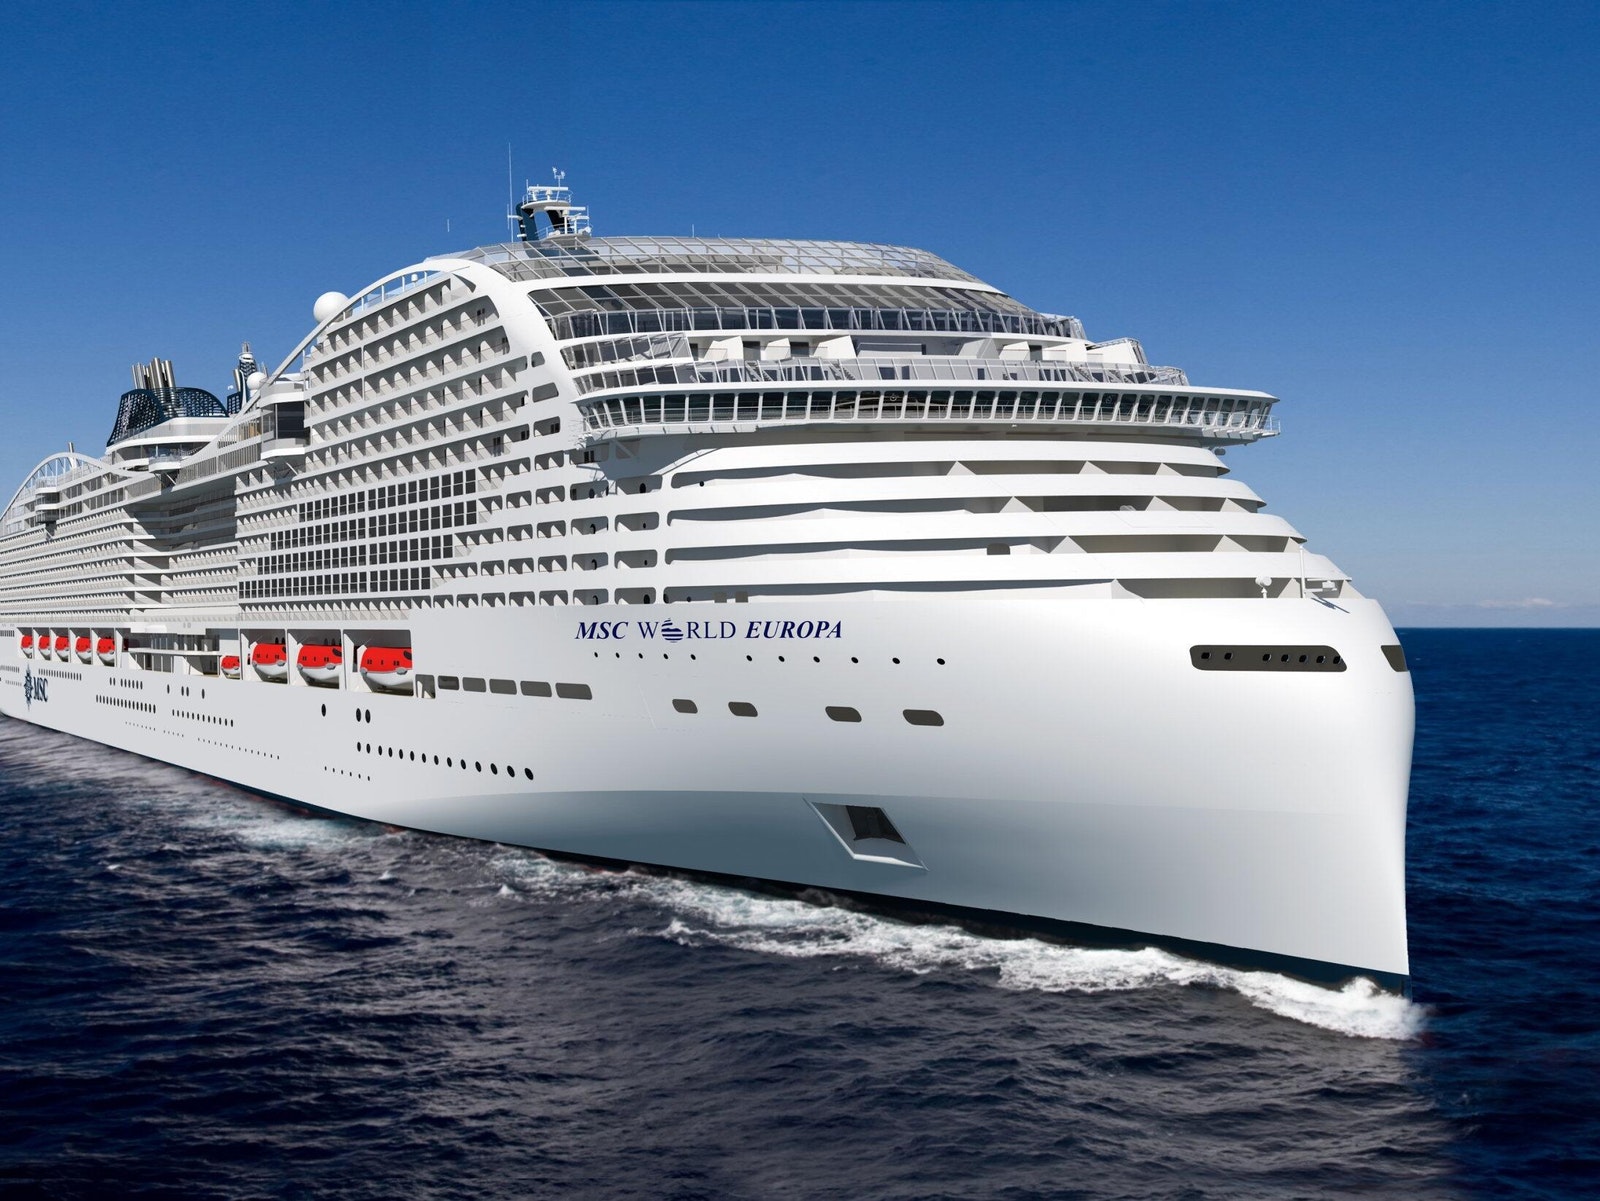 MSC Cruises starts construction on second vessel in World Class series